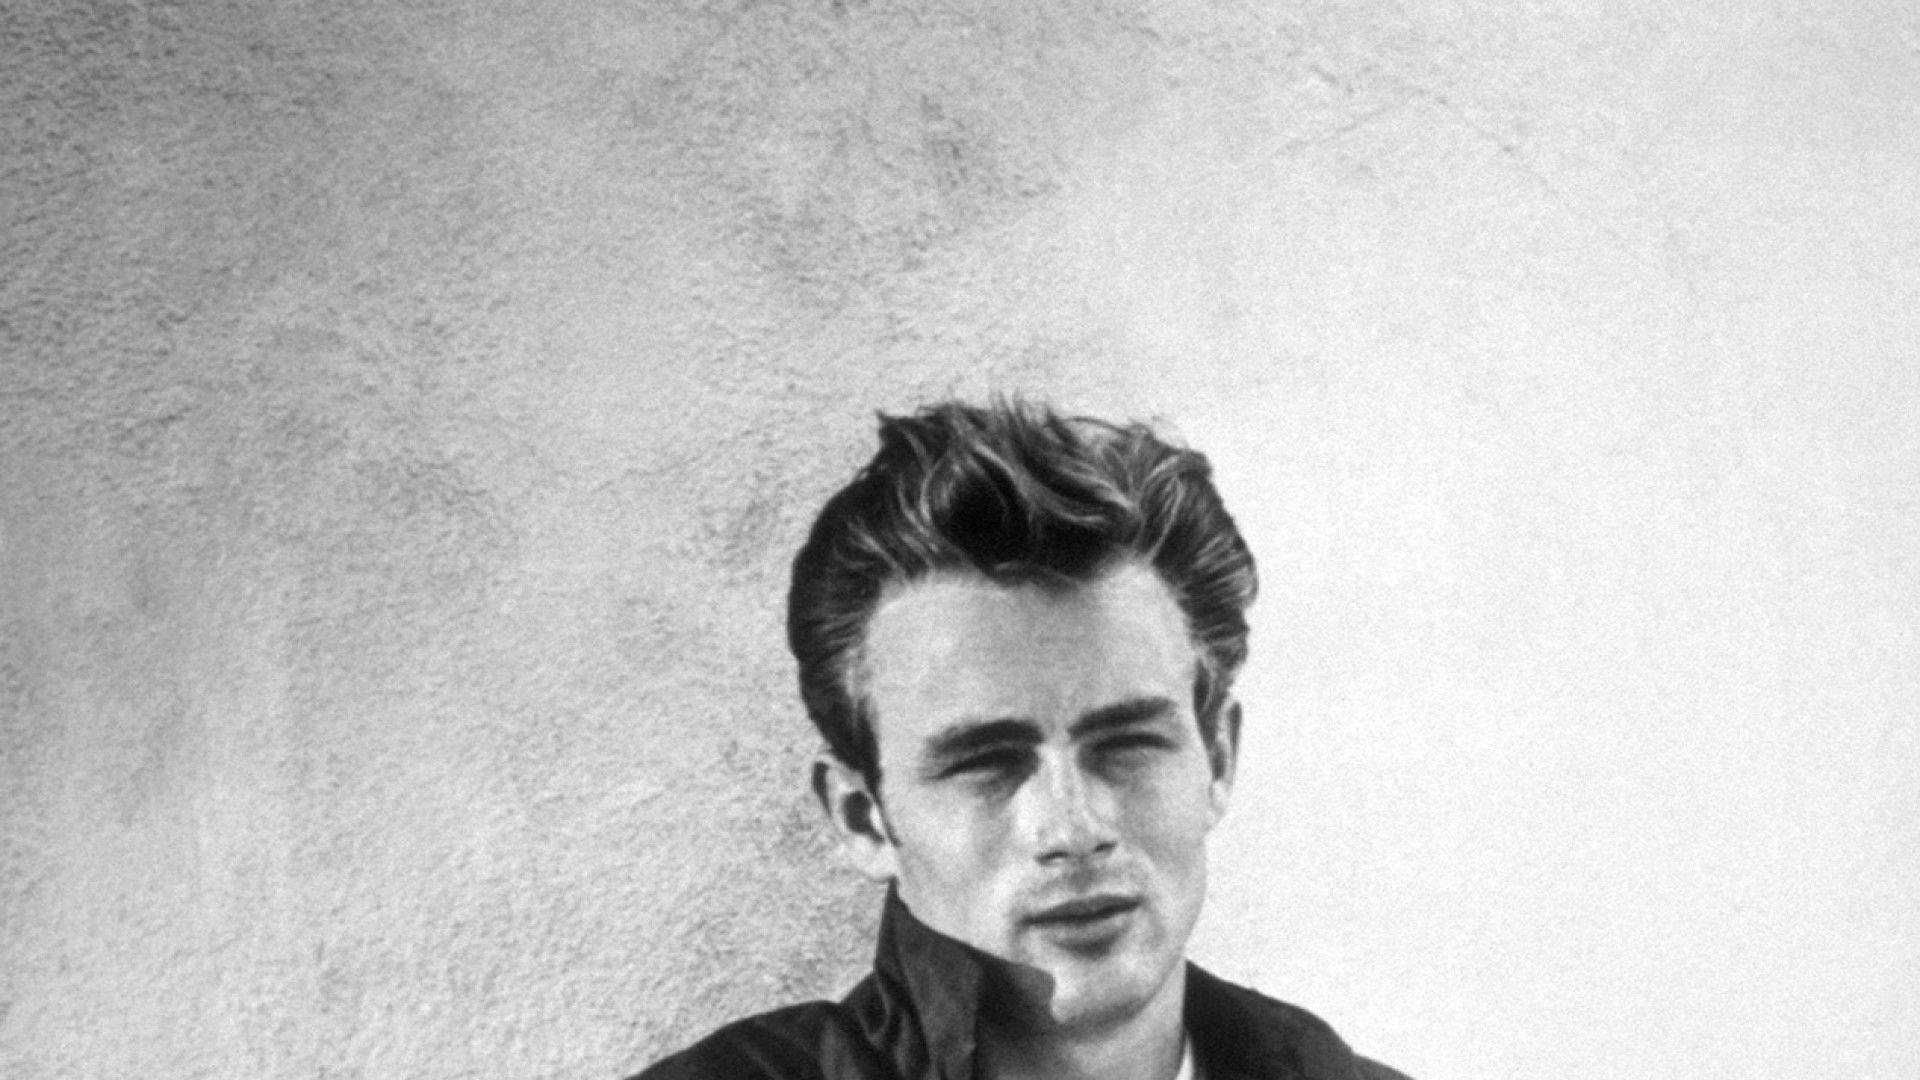 ScreenHeaven: James Dean Rebel Without a Cause grayscale jeans